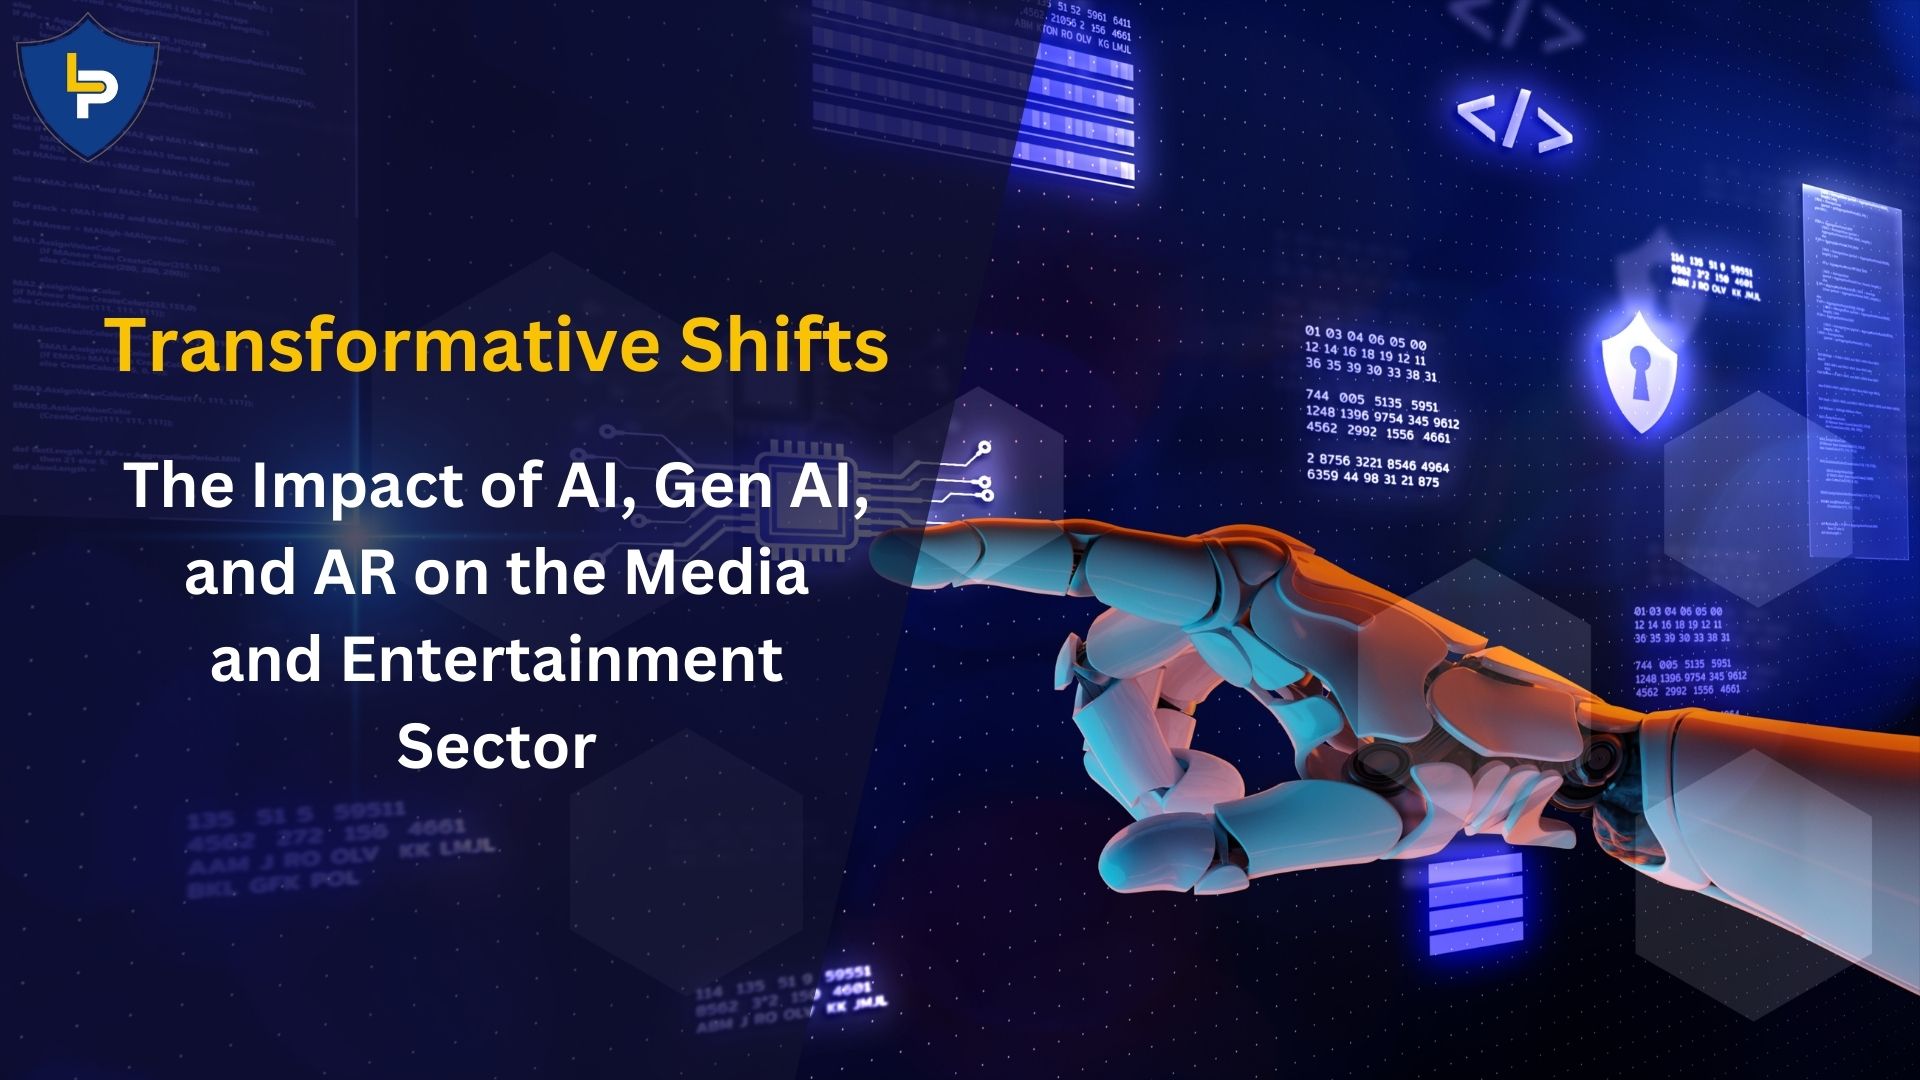 Transformative Shifts The Impact of AI, Gen AI, and AR on the Media and Entertainment Sector (1)